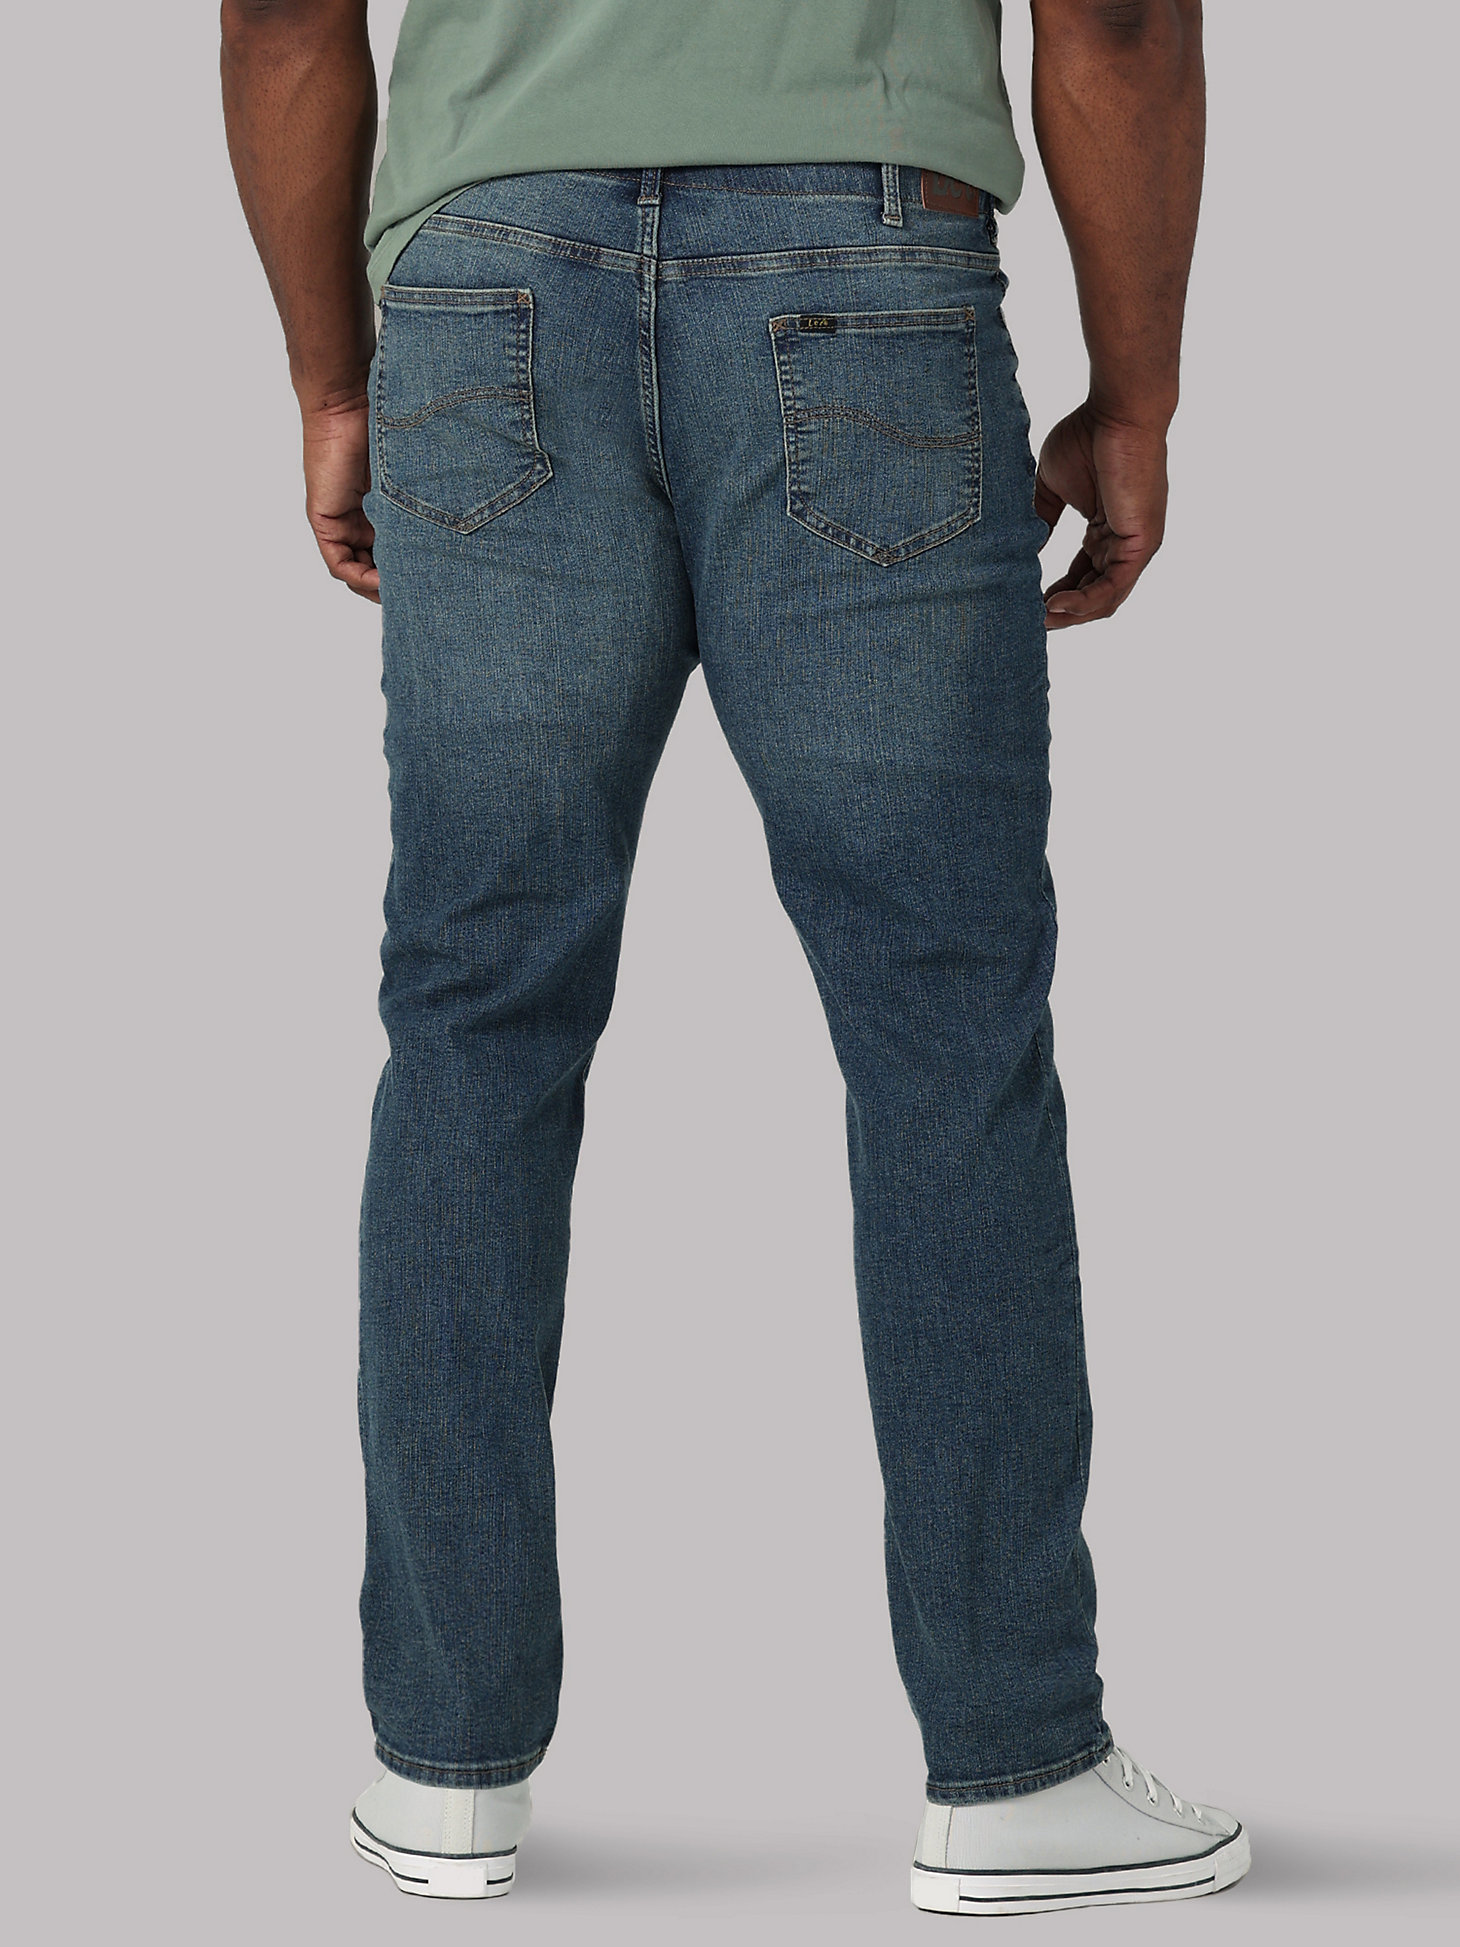 Men’s Extreme Motion Relaxed Jean (Big&Tall) in Mega alternative view 1